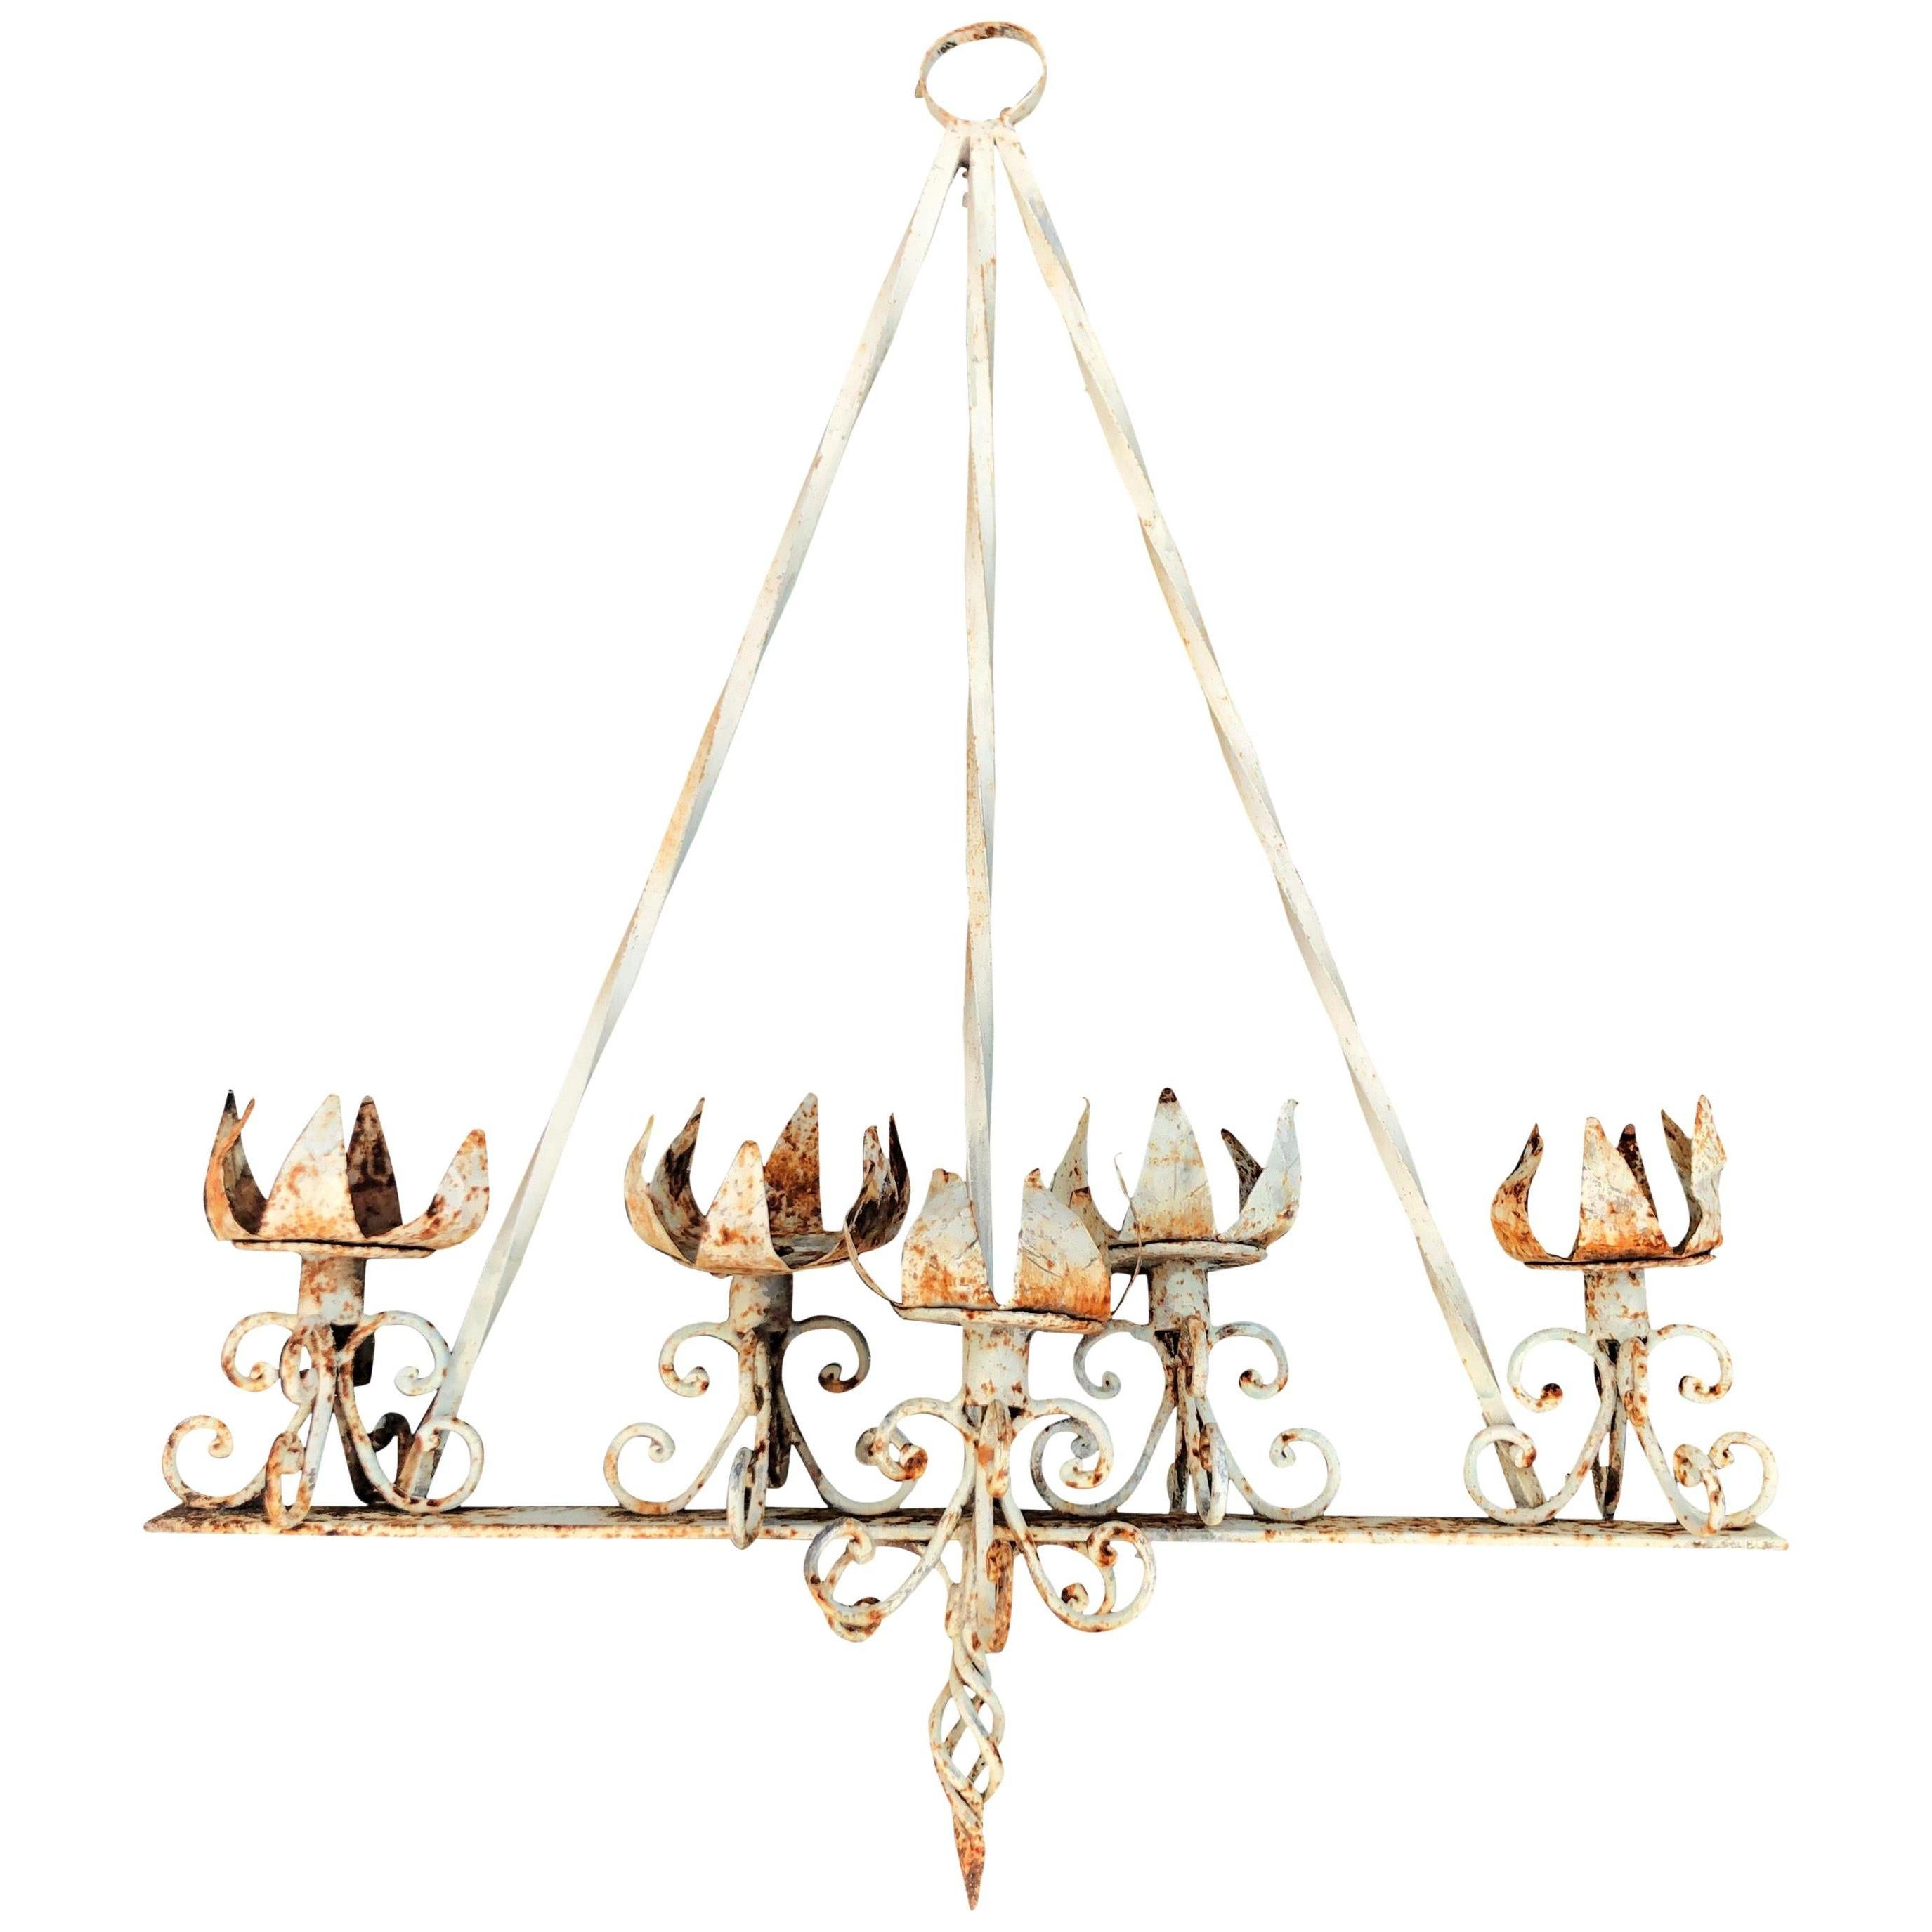 Medieval Style Iron Wall Candelabra